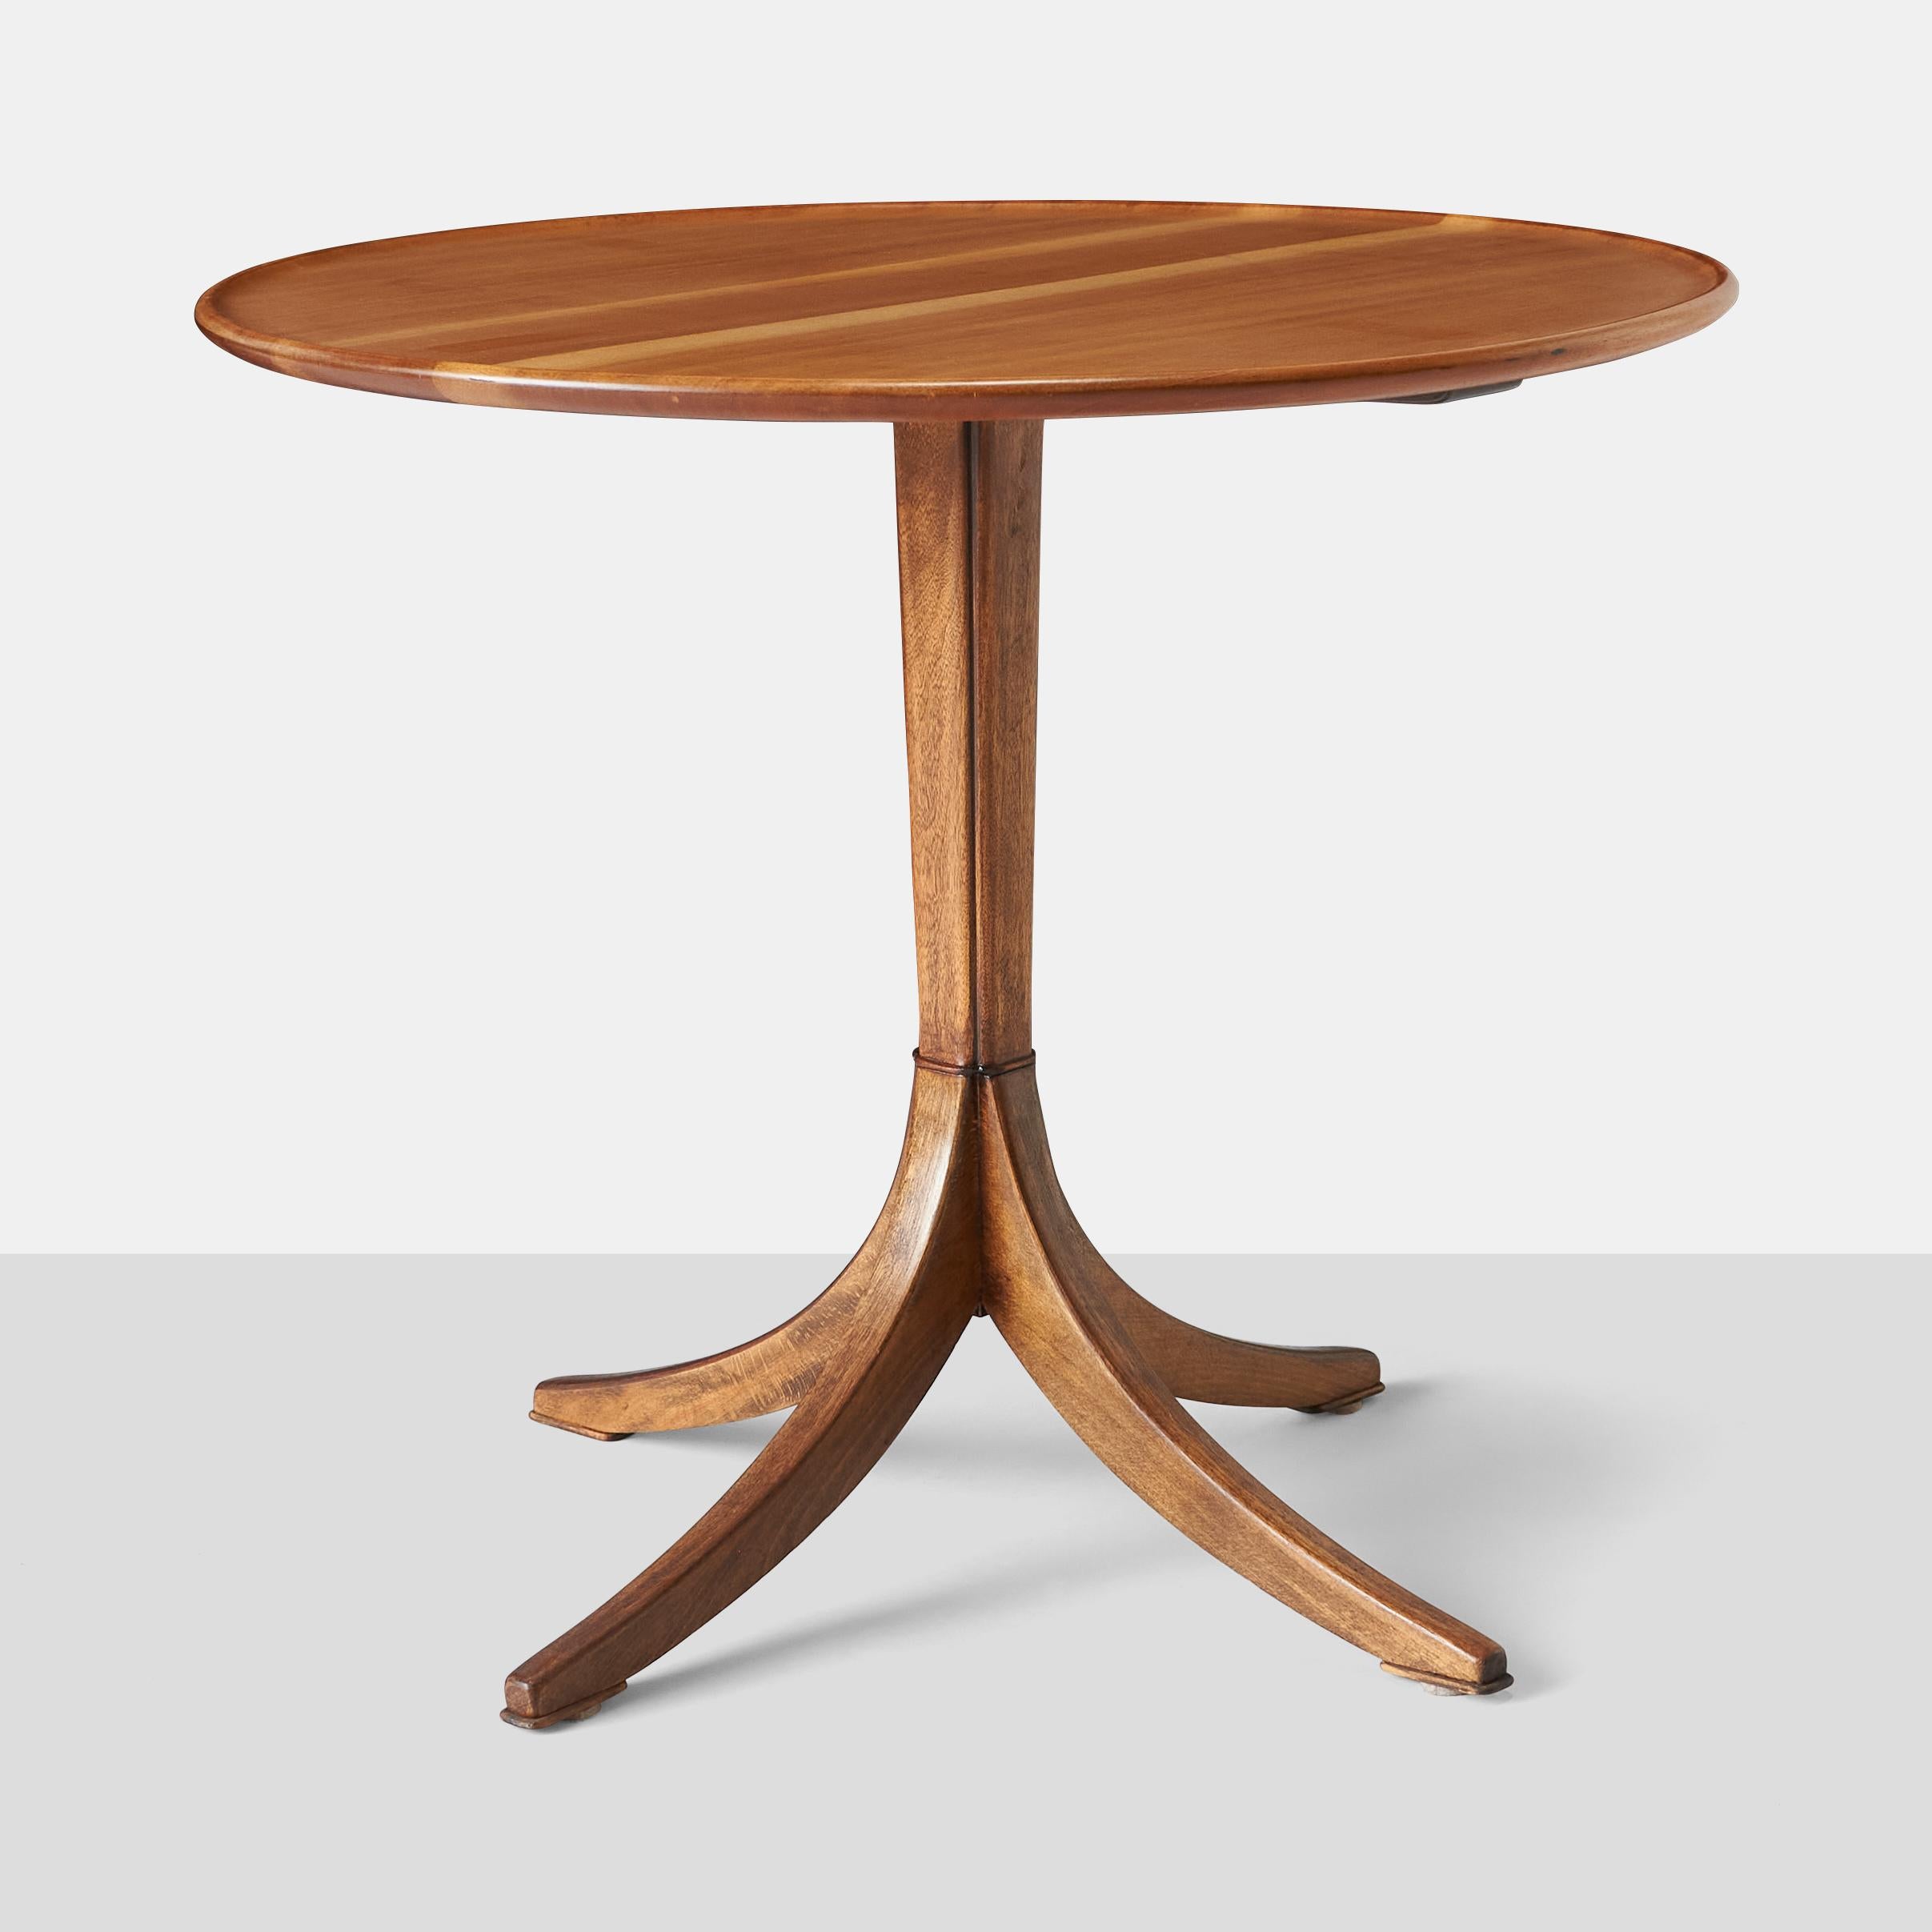 Circular table with rimmed and raised panel made of solid mahogany, with center column and four-star base.